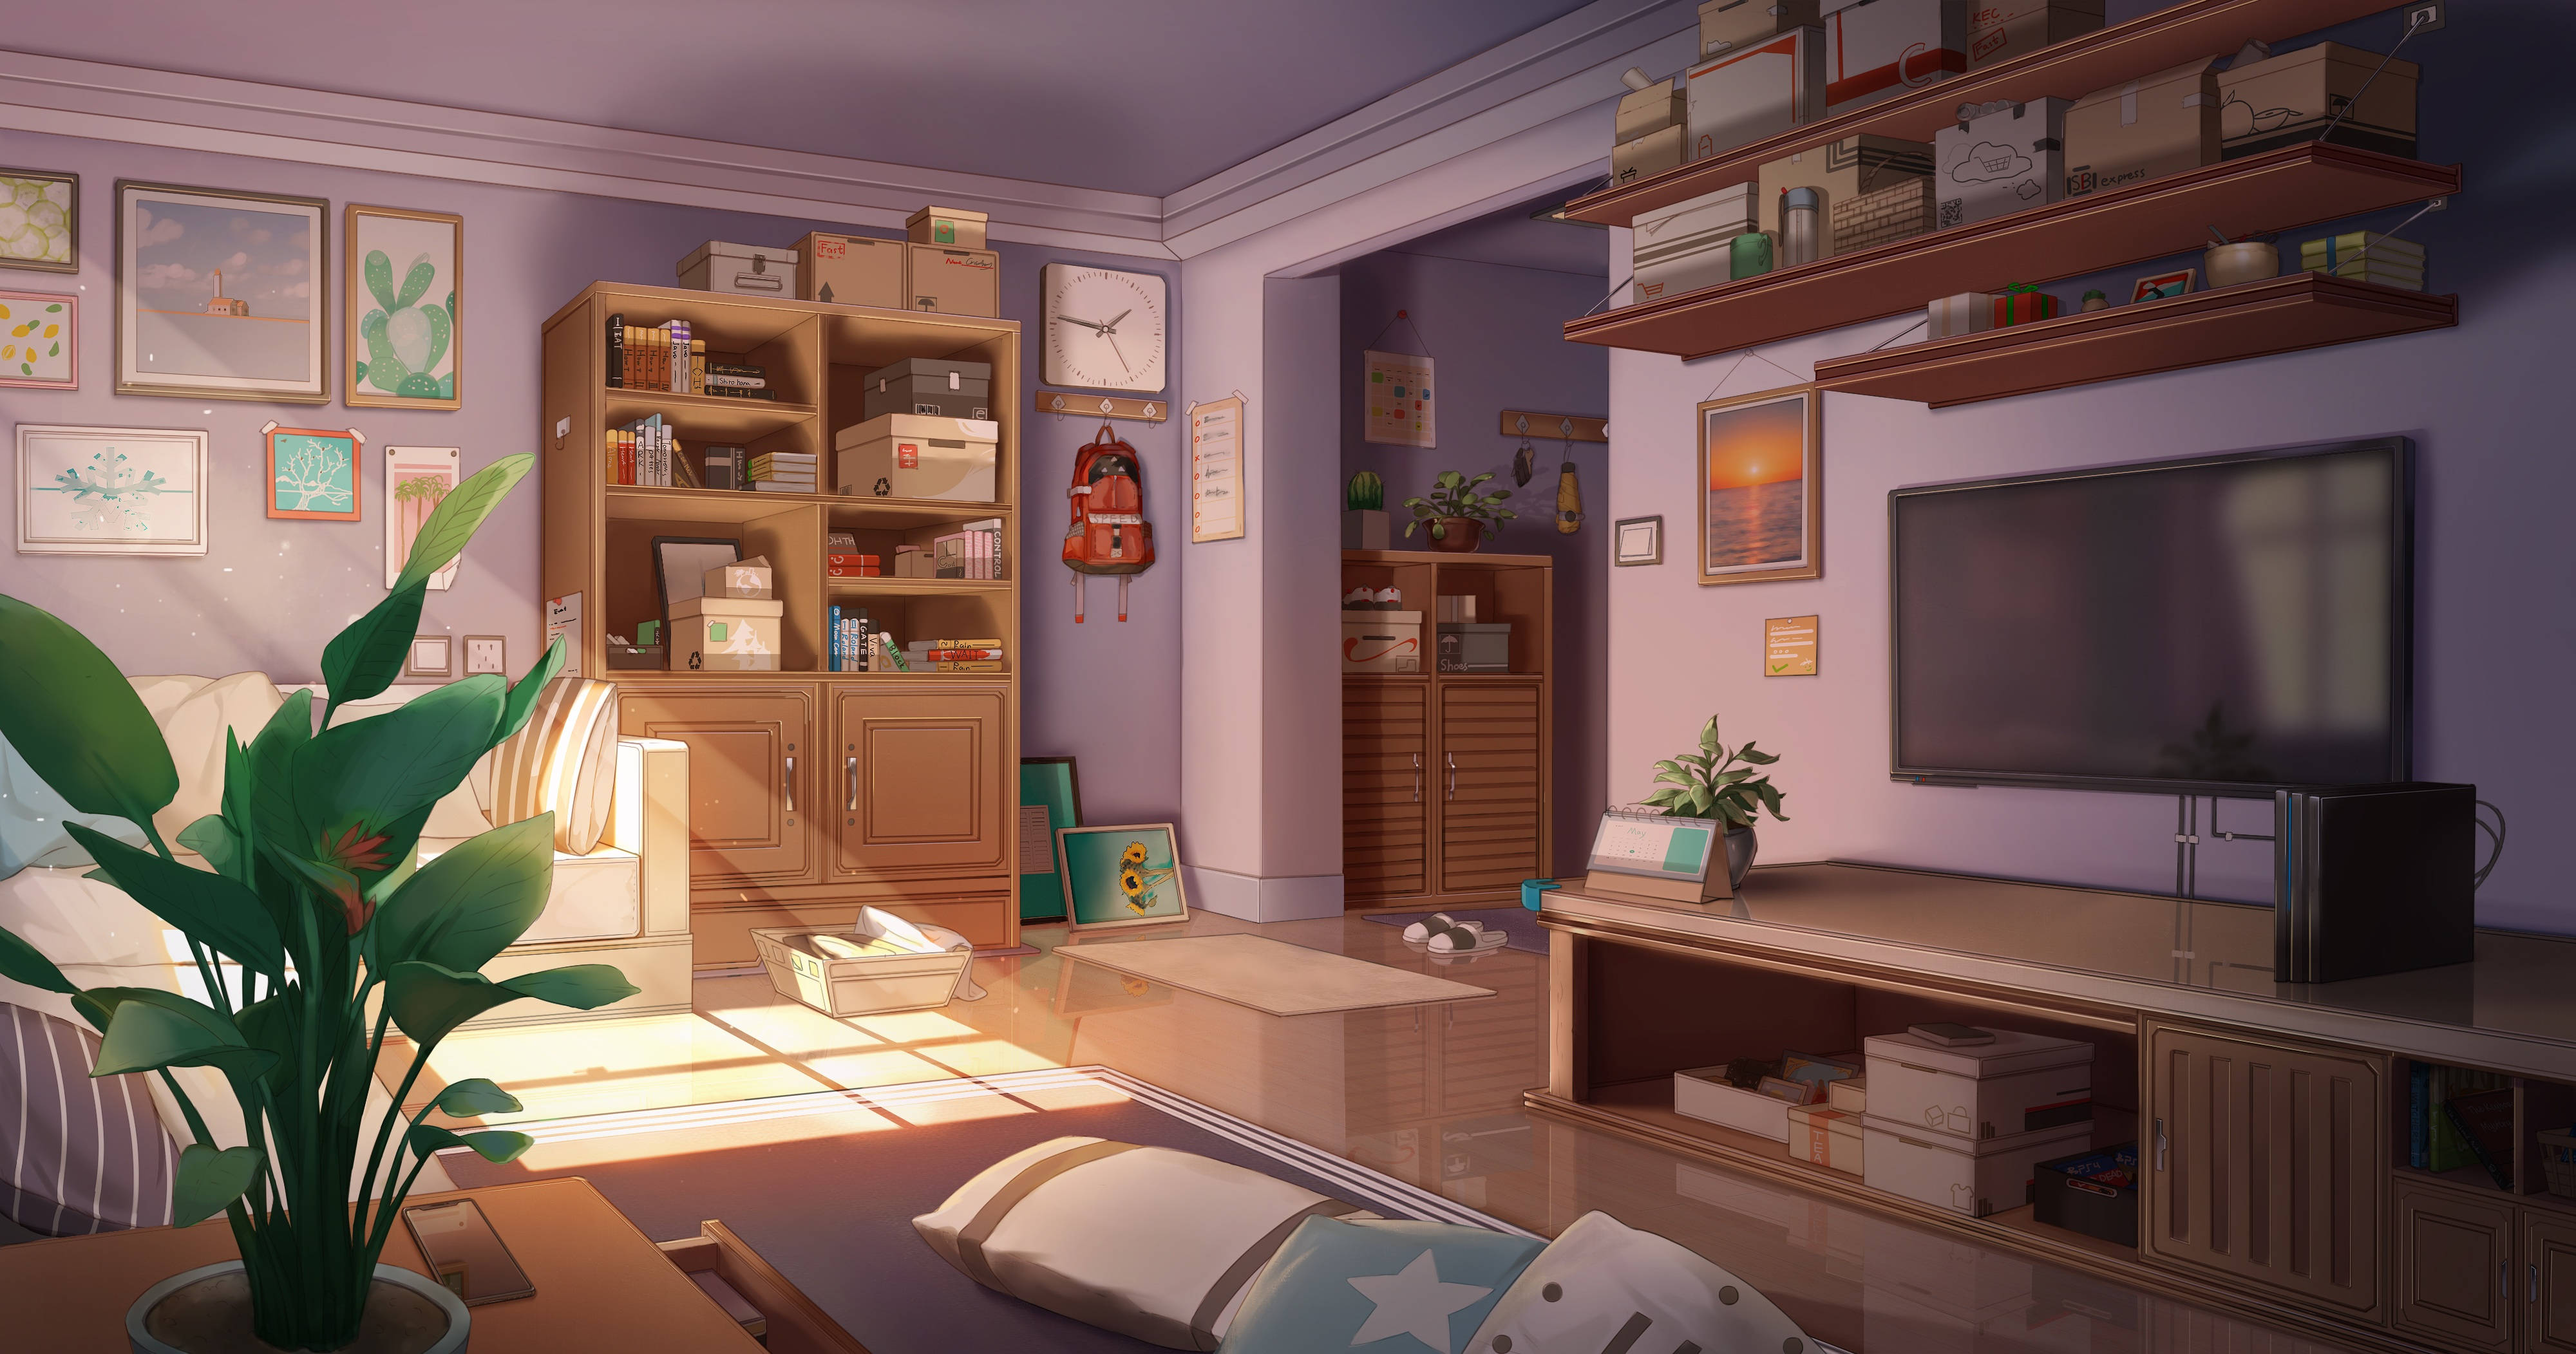 Download Wonderfully Customized Anime Bedroom Wallpaper 